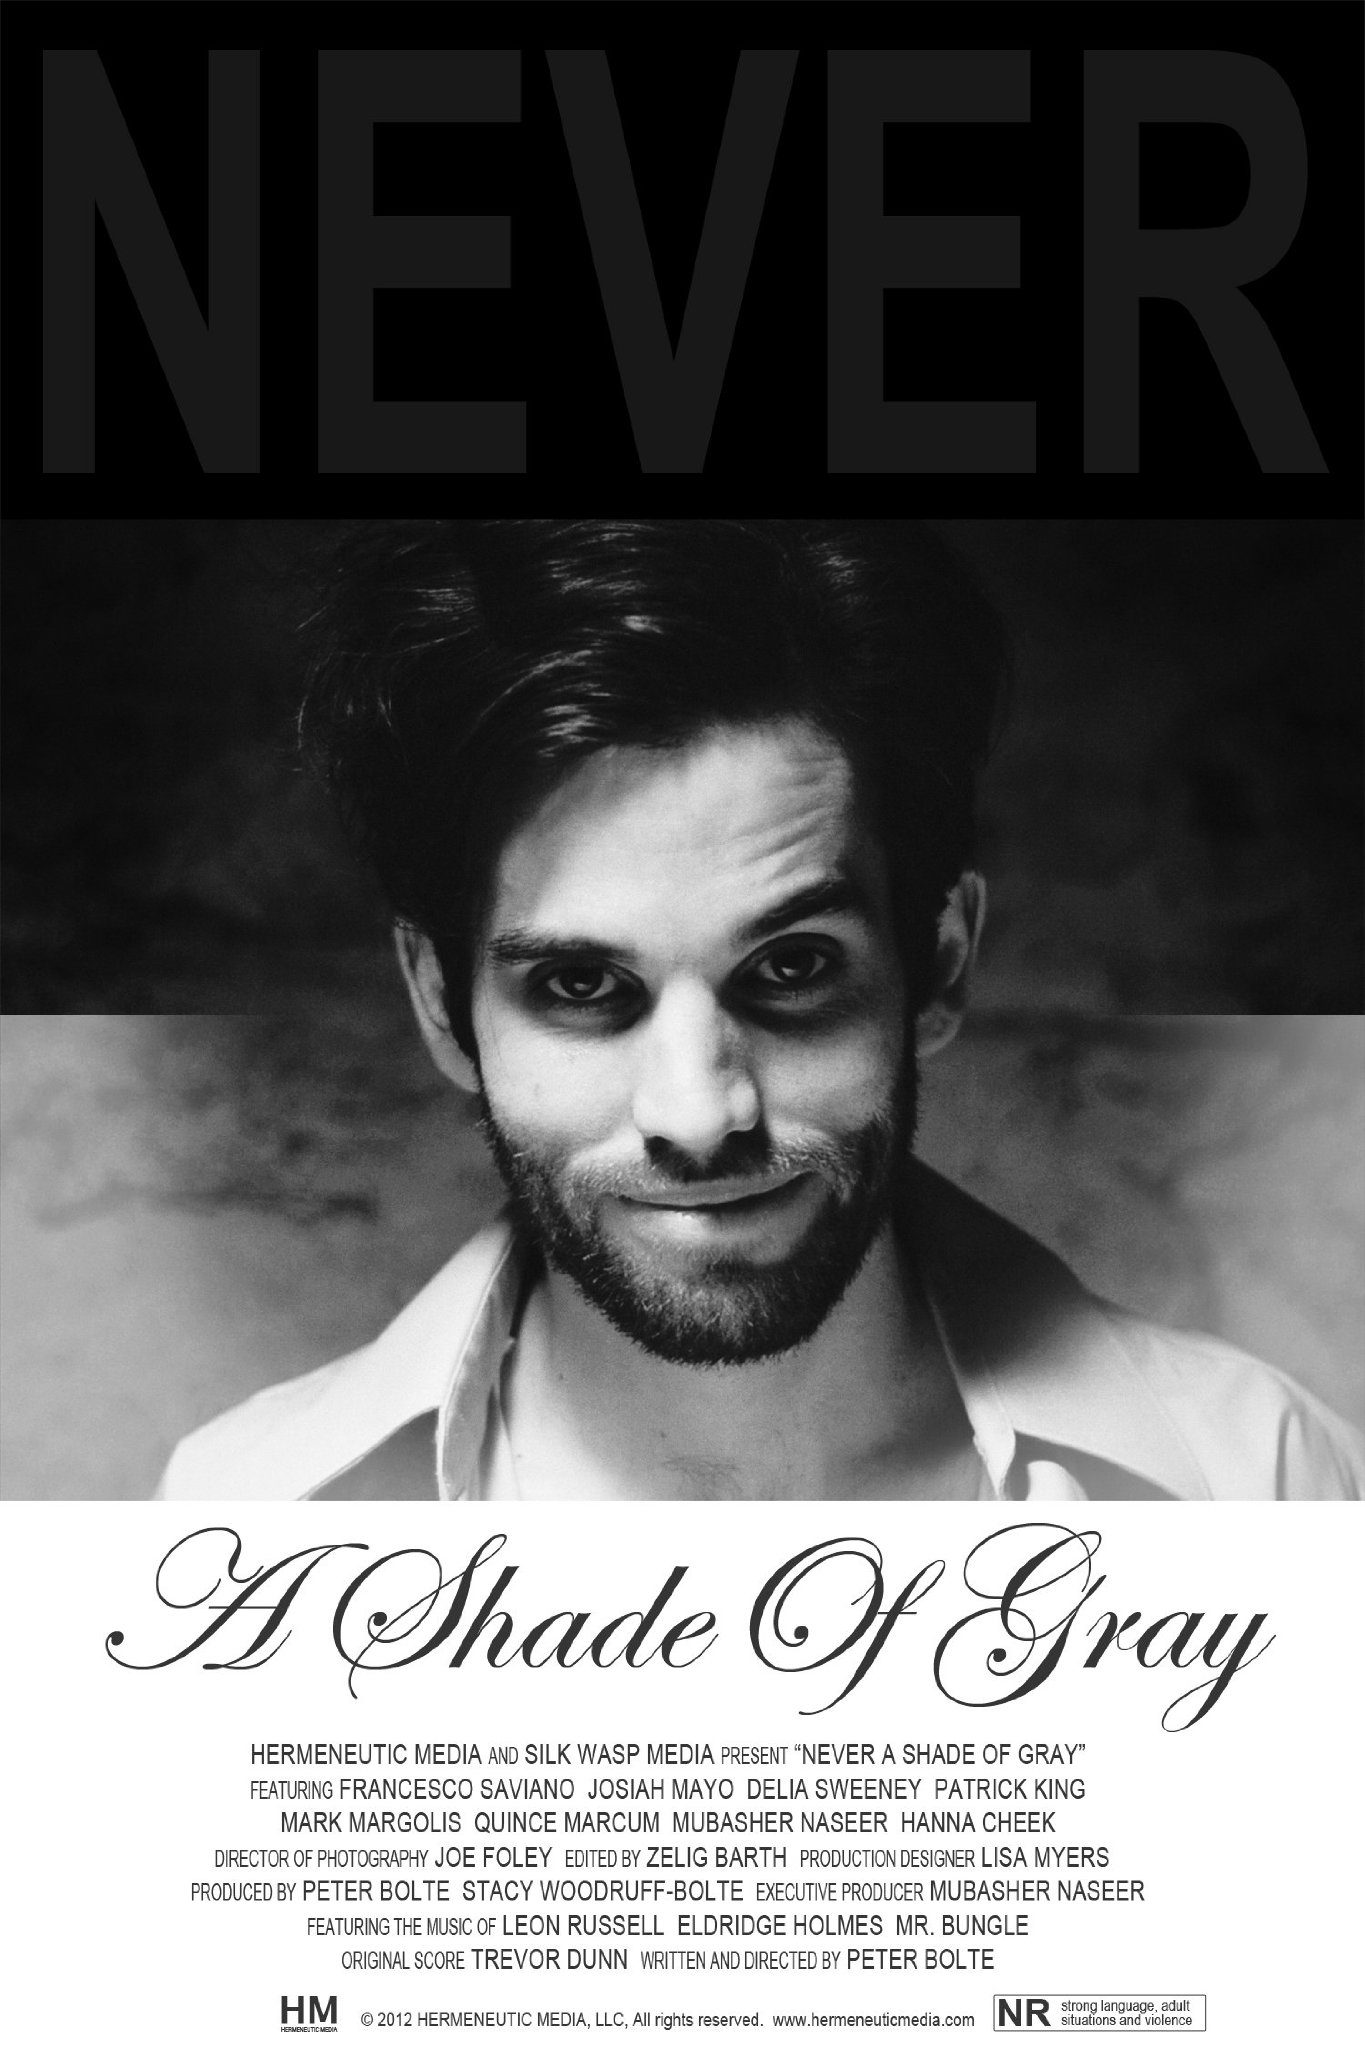 Фото - Never a Shade of Gray: 1365x2048 / 290 Кб